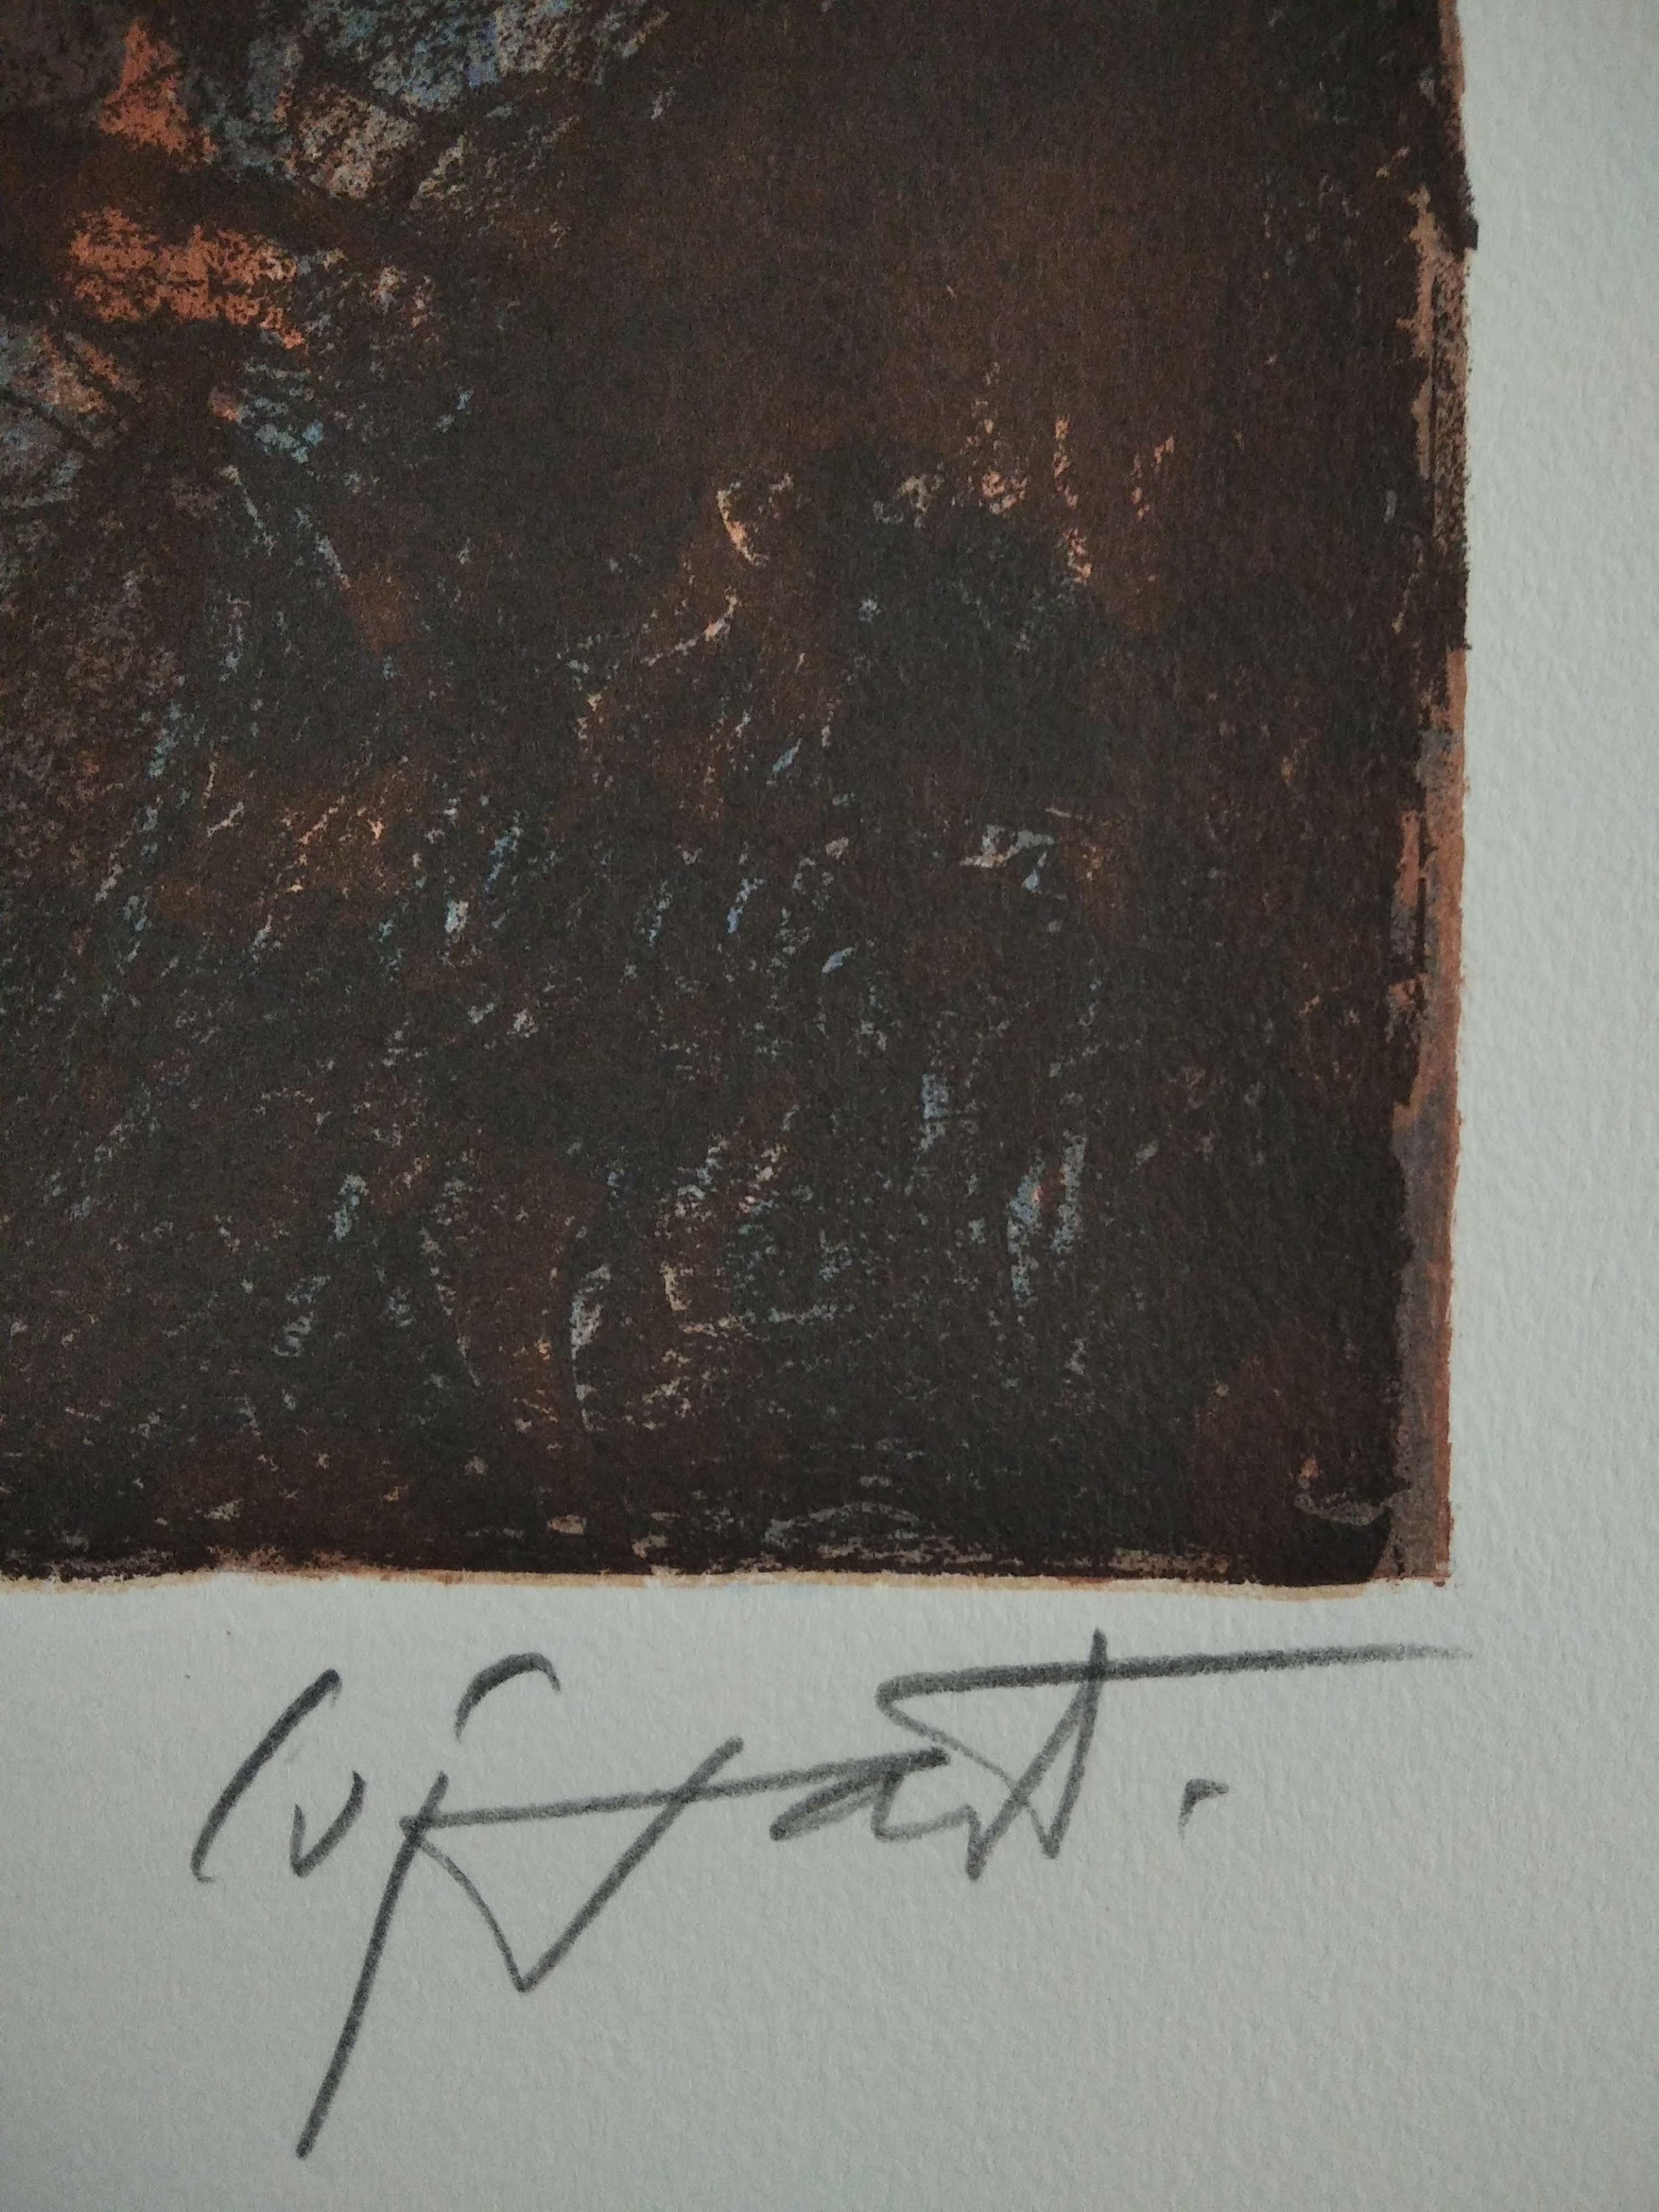 Untitled - Abstract Print by Modest Cuixart i Tàpies